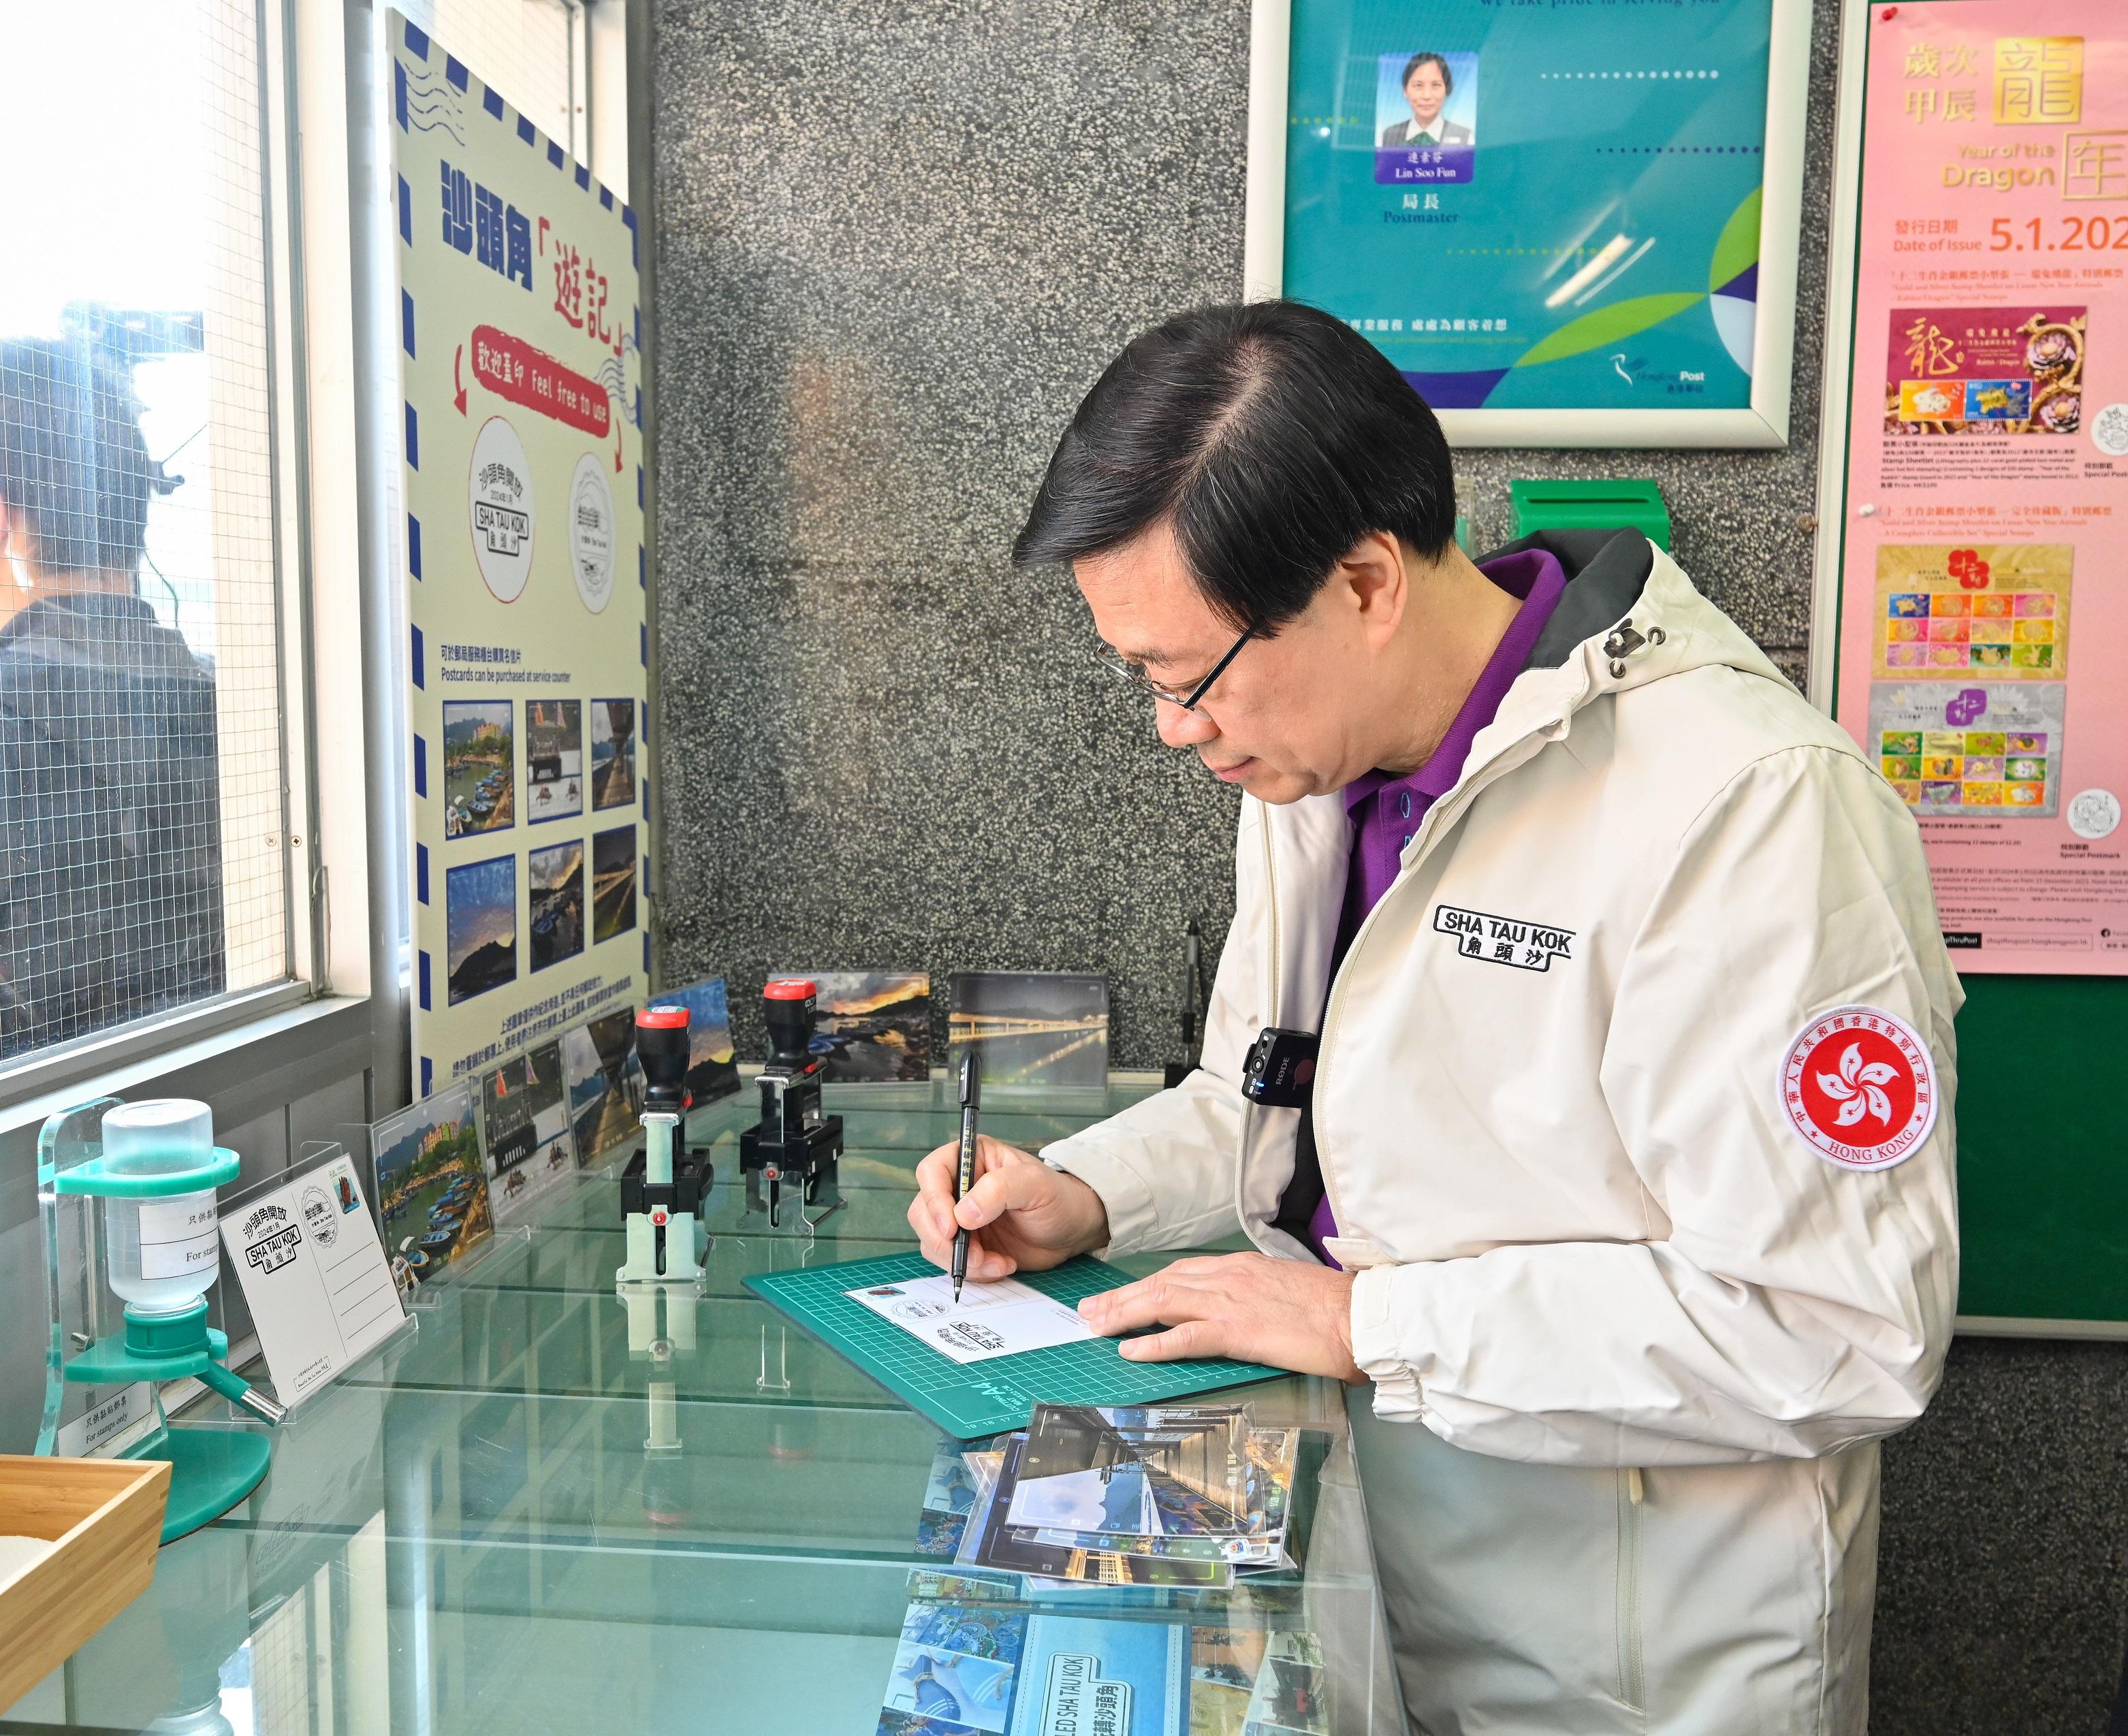 The Chief Executive, Mr John Lee, officiated at the Second Phase Opening-up of Sha Tau Kok Launching Ceremony today (January 6). Photo shows Mr Lee writing on a postcard at the Sha Tau Kok Post Office.